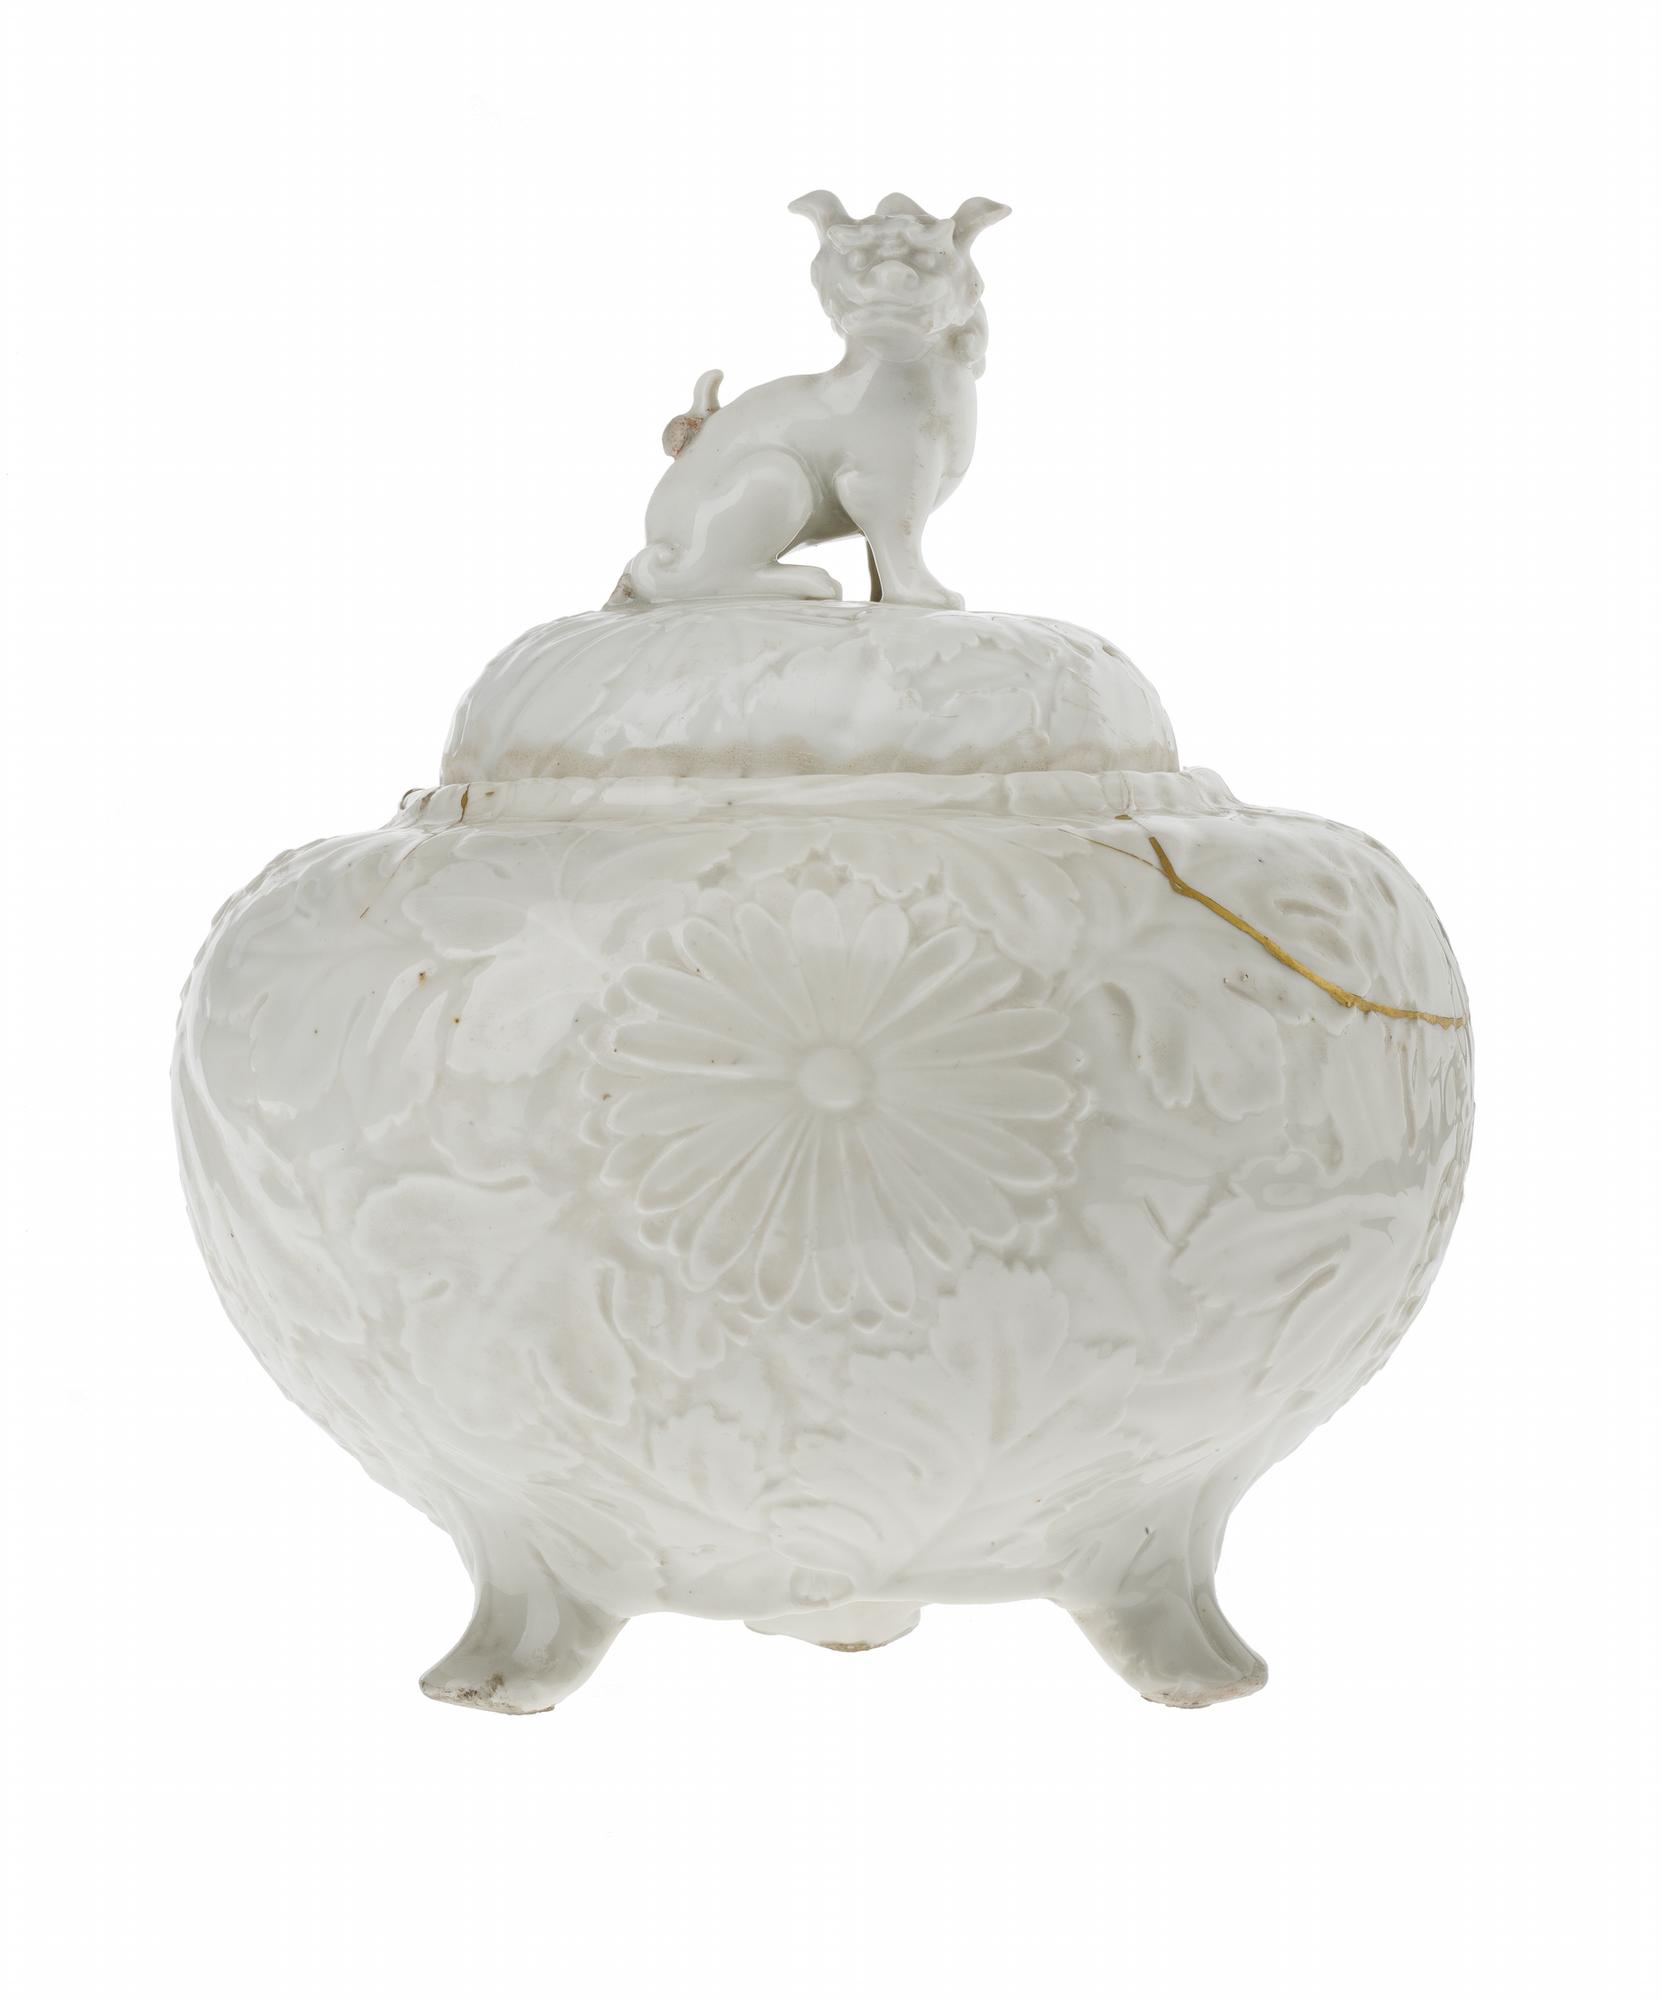 Jar and cover of porcelain with white glaze, bulbous and tripod, moulded with chrysanthemums in relief, lion-dog knop on cover, broken and repaired with gold lacquer: Korea, 18th century.